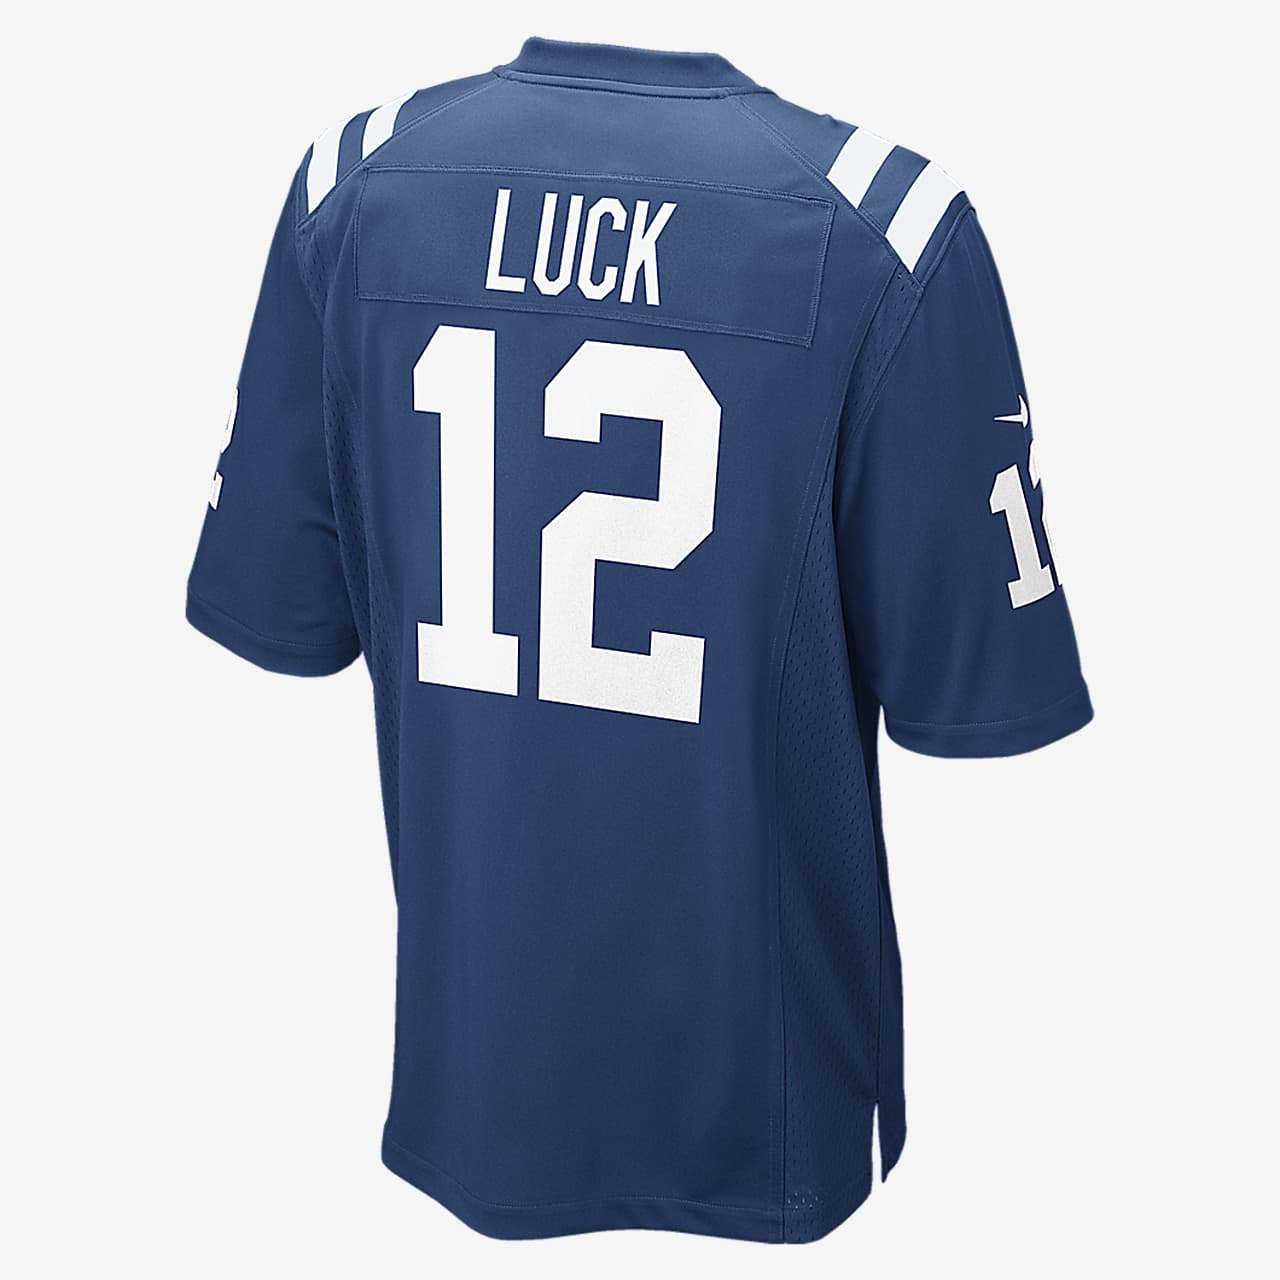 NFL Indianapolis Colts (Andrew Luck) Men's Football Home Game Jersey